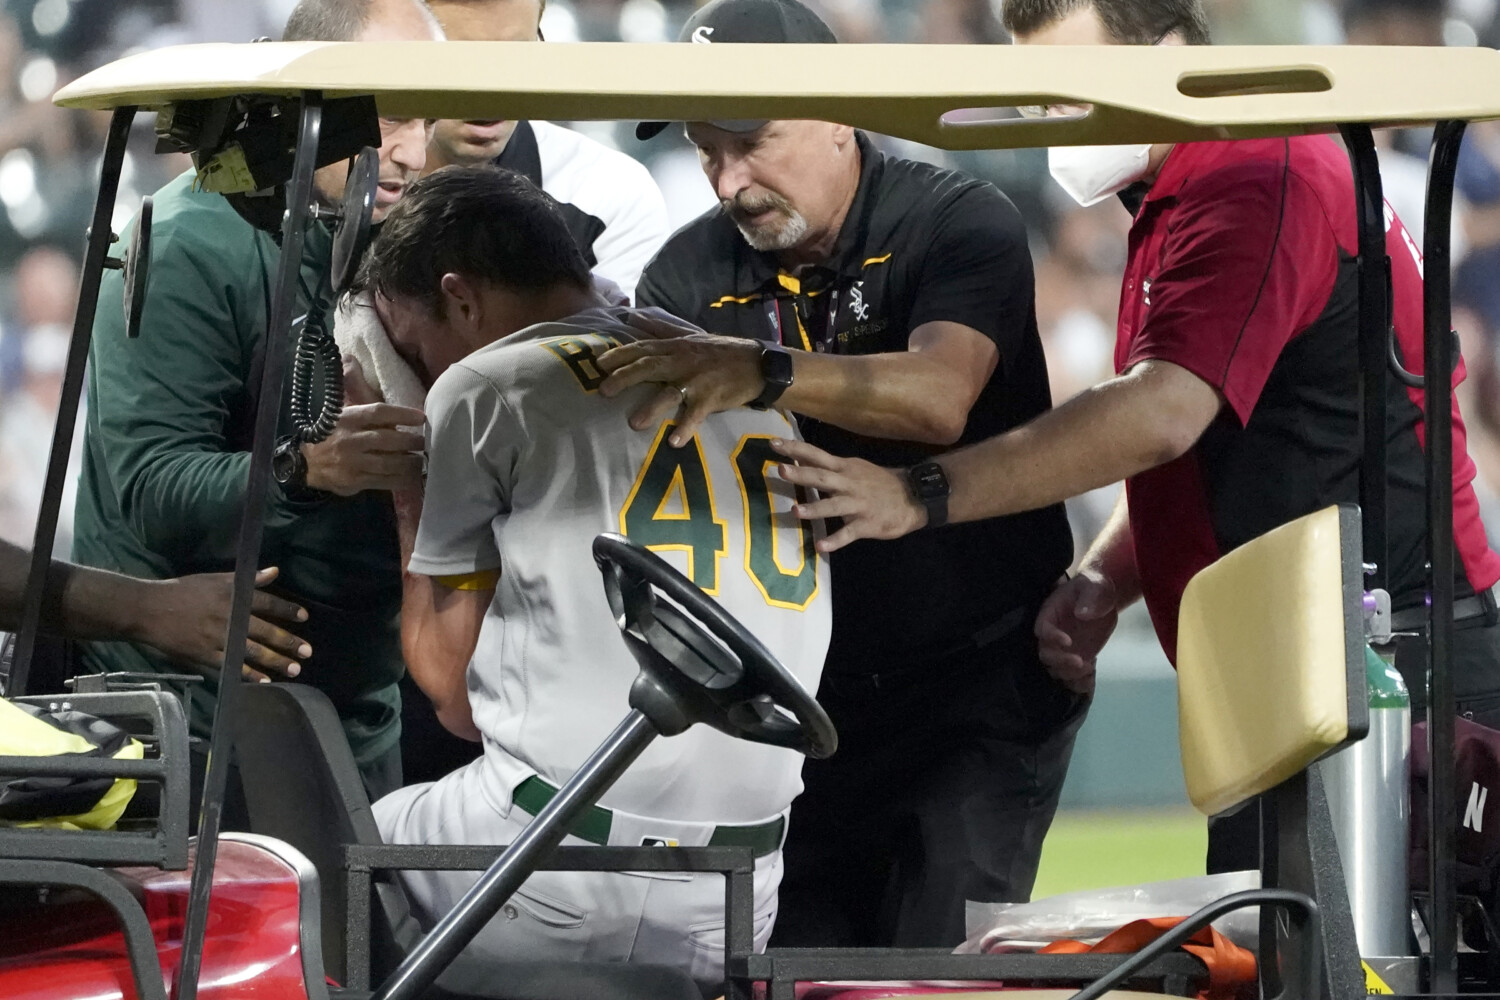 MLB notebook: A's pitcher released from hospital after being struck